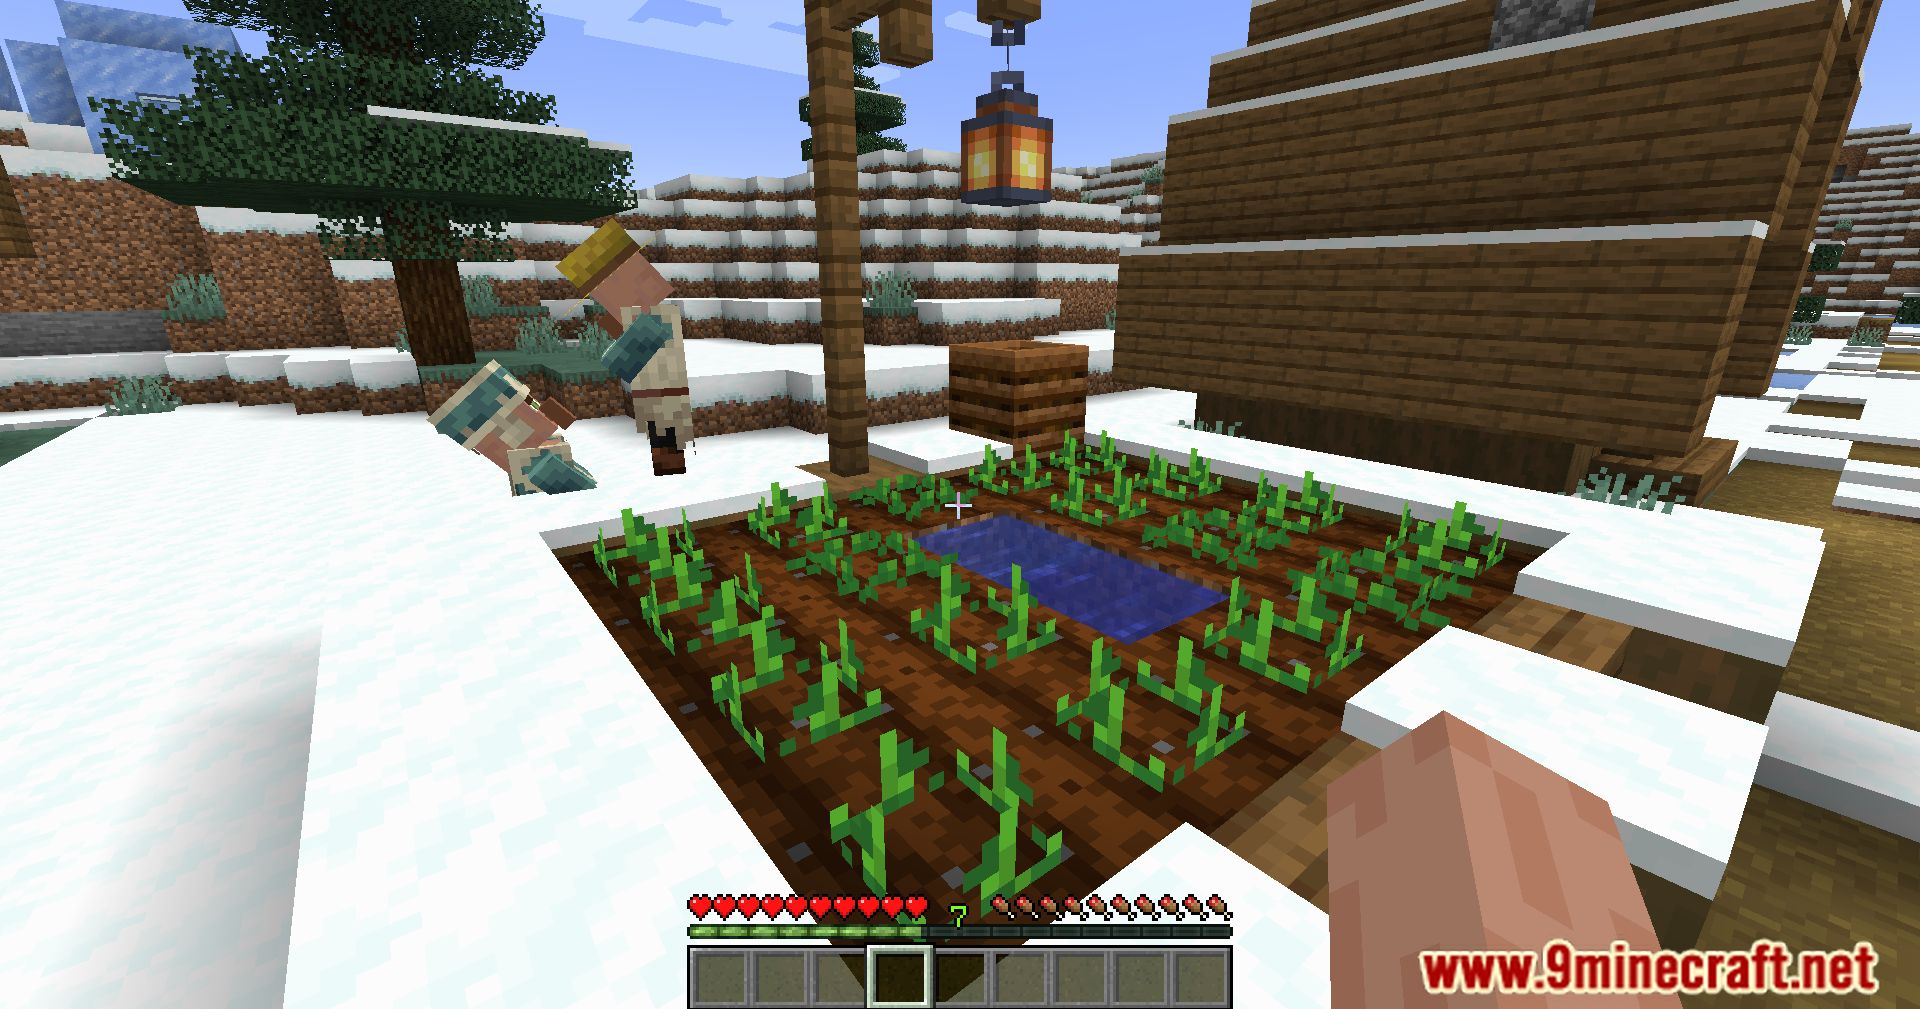 More Powerful Game Rules Mod (1.20.1, 1.19.4) - Your Minecraft, Your Rules! 8